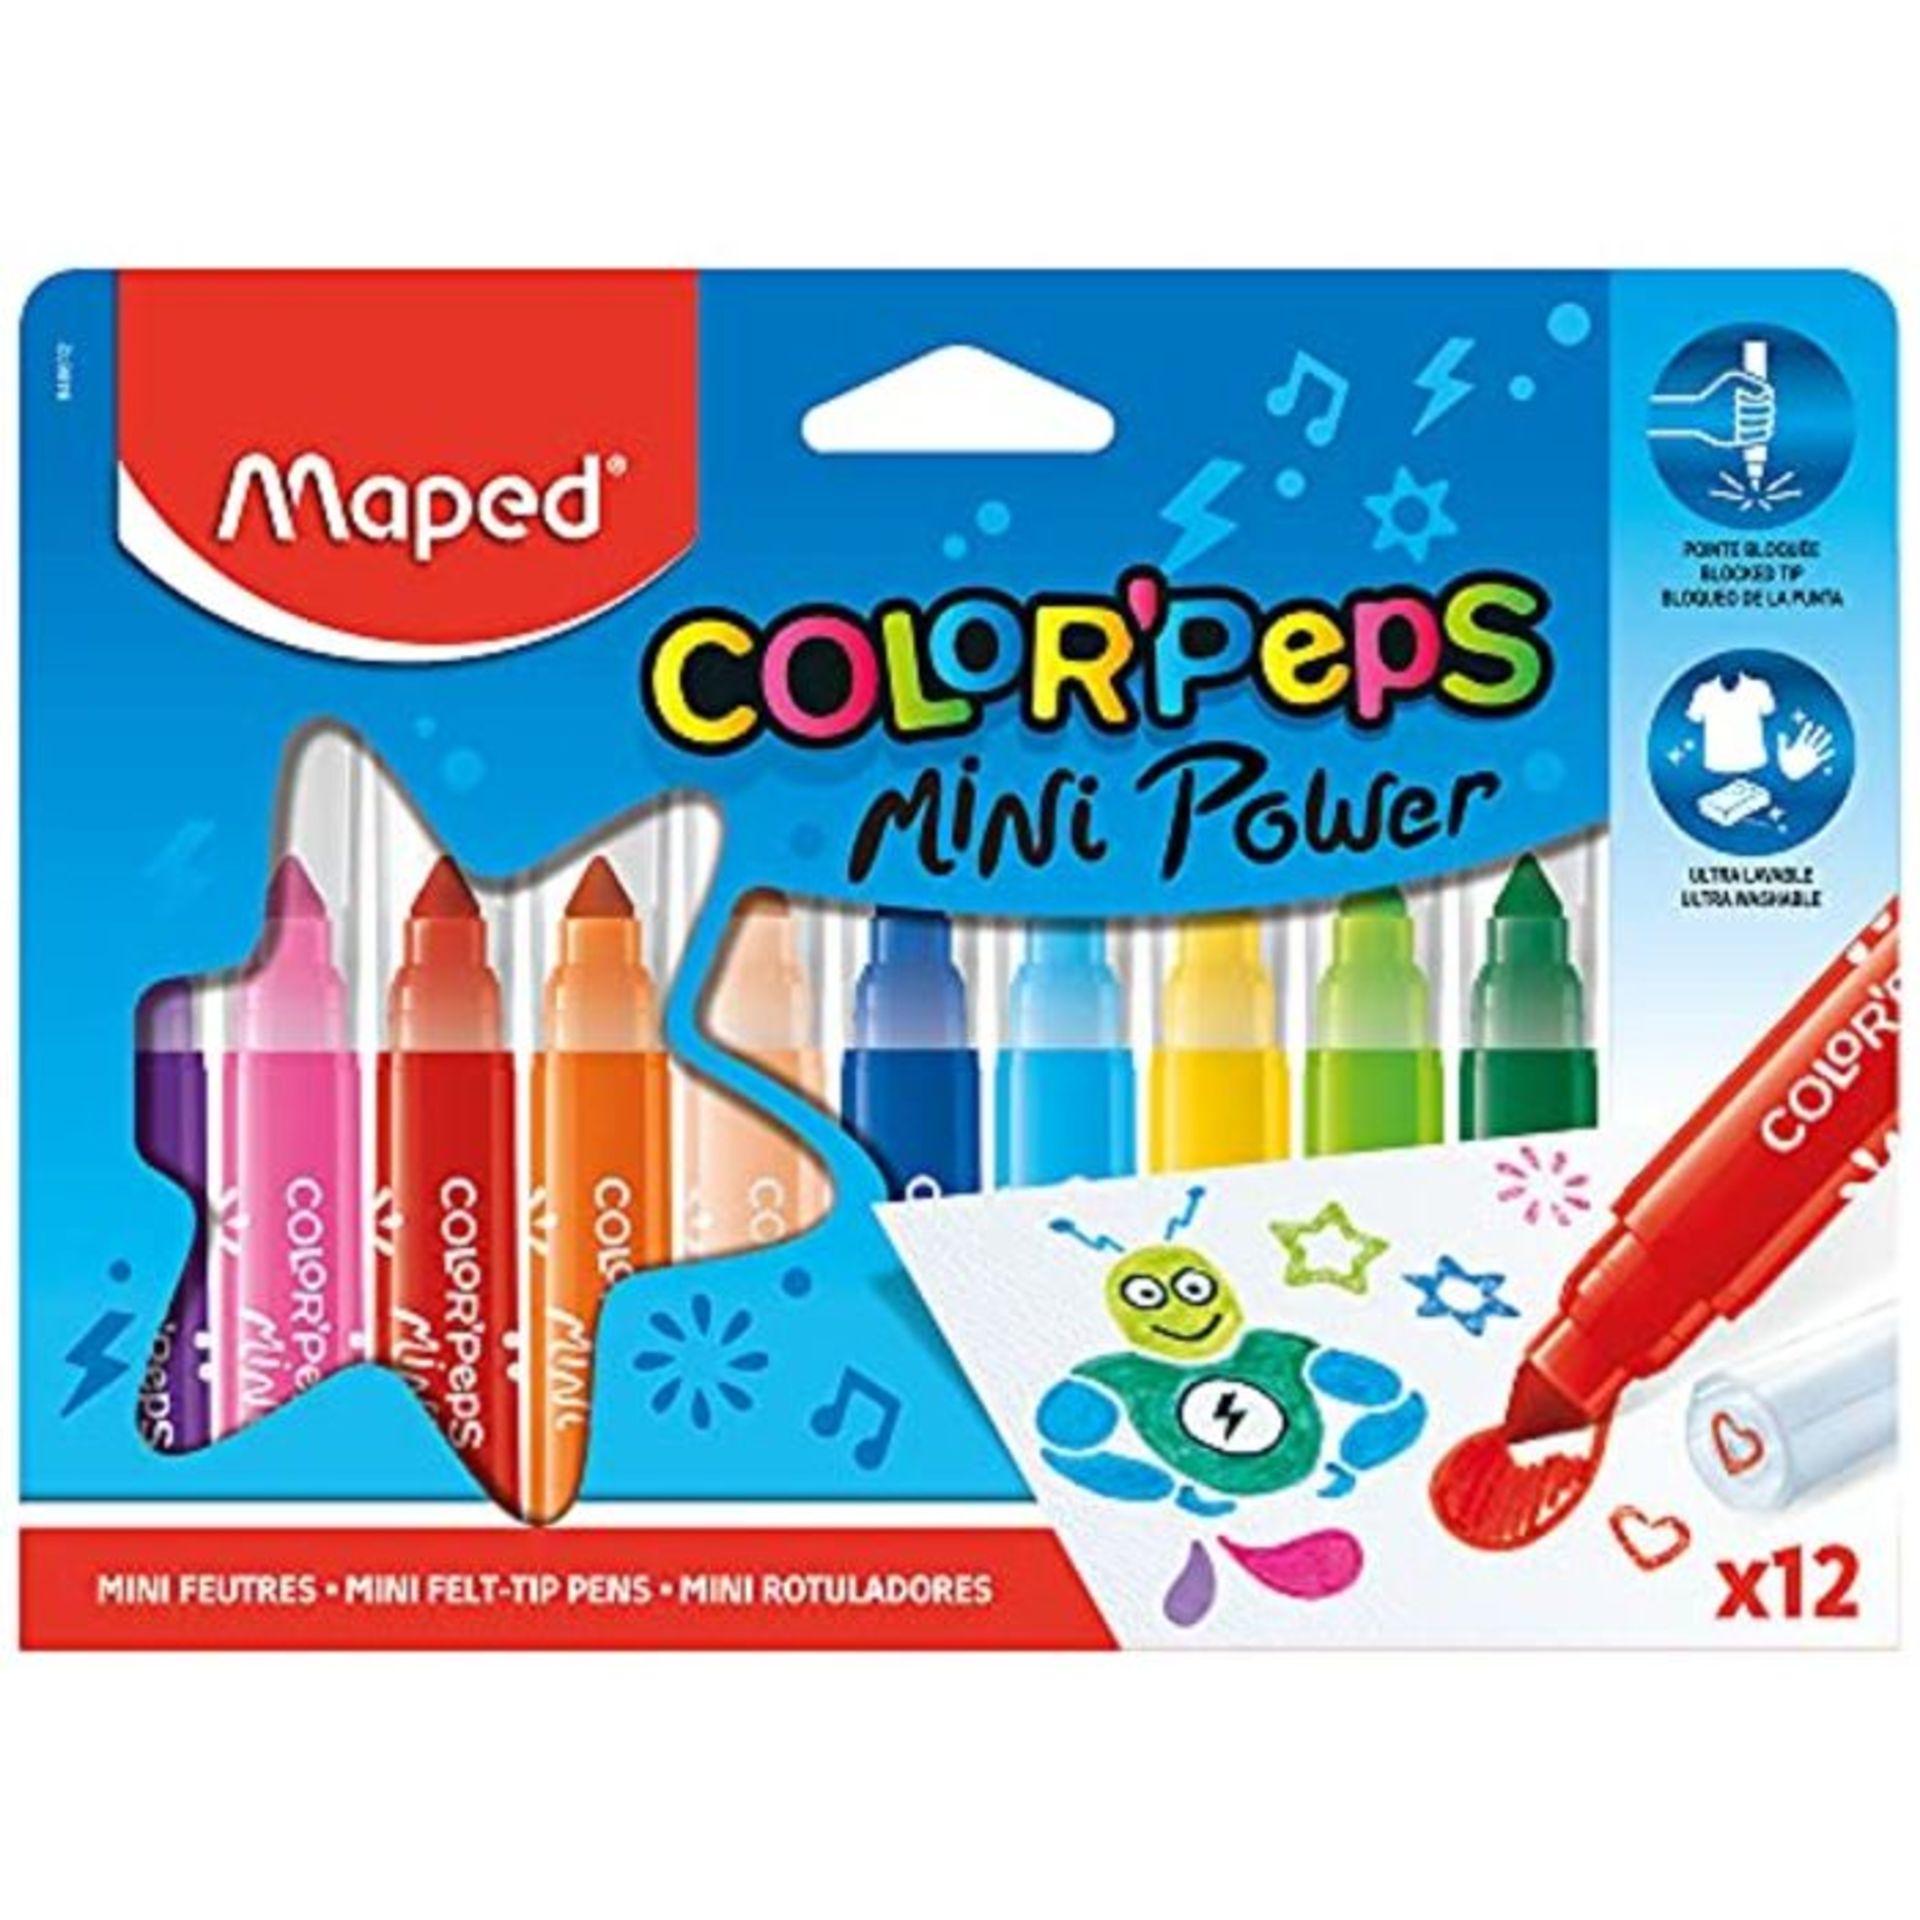 COMBINED RRP £418.00 LOT TO CONTAIN 50 ASSORTED Tech Products: GOGME, Post-it, Maped, Maped, Br - Image 4 of 51